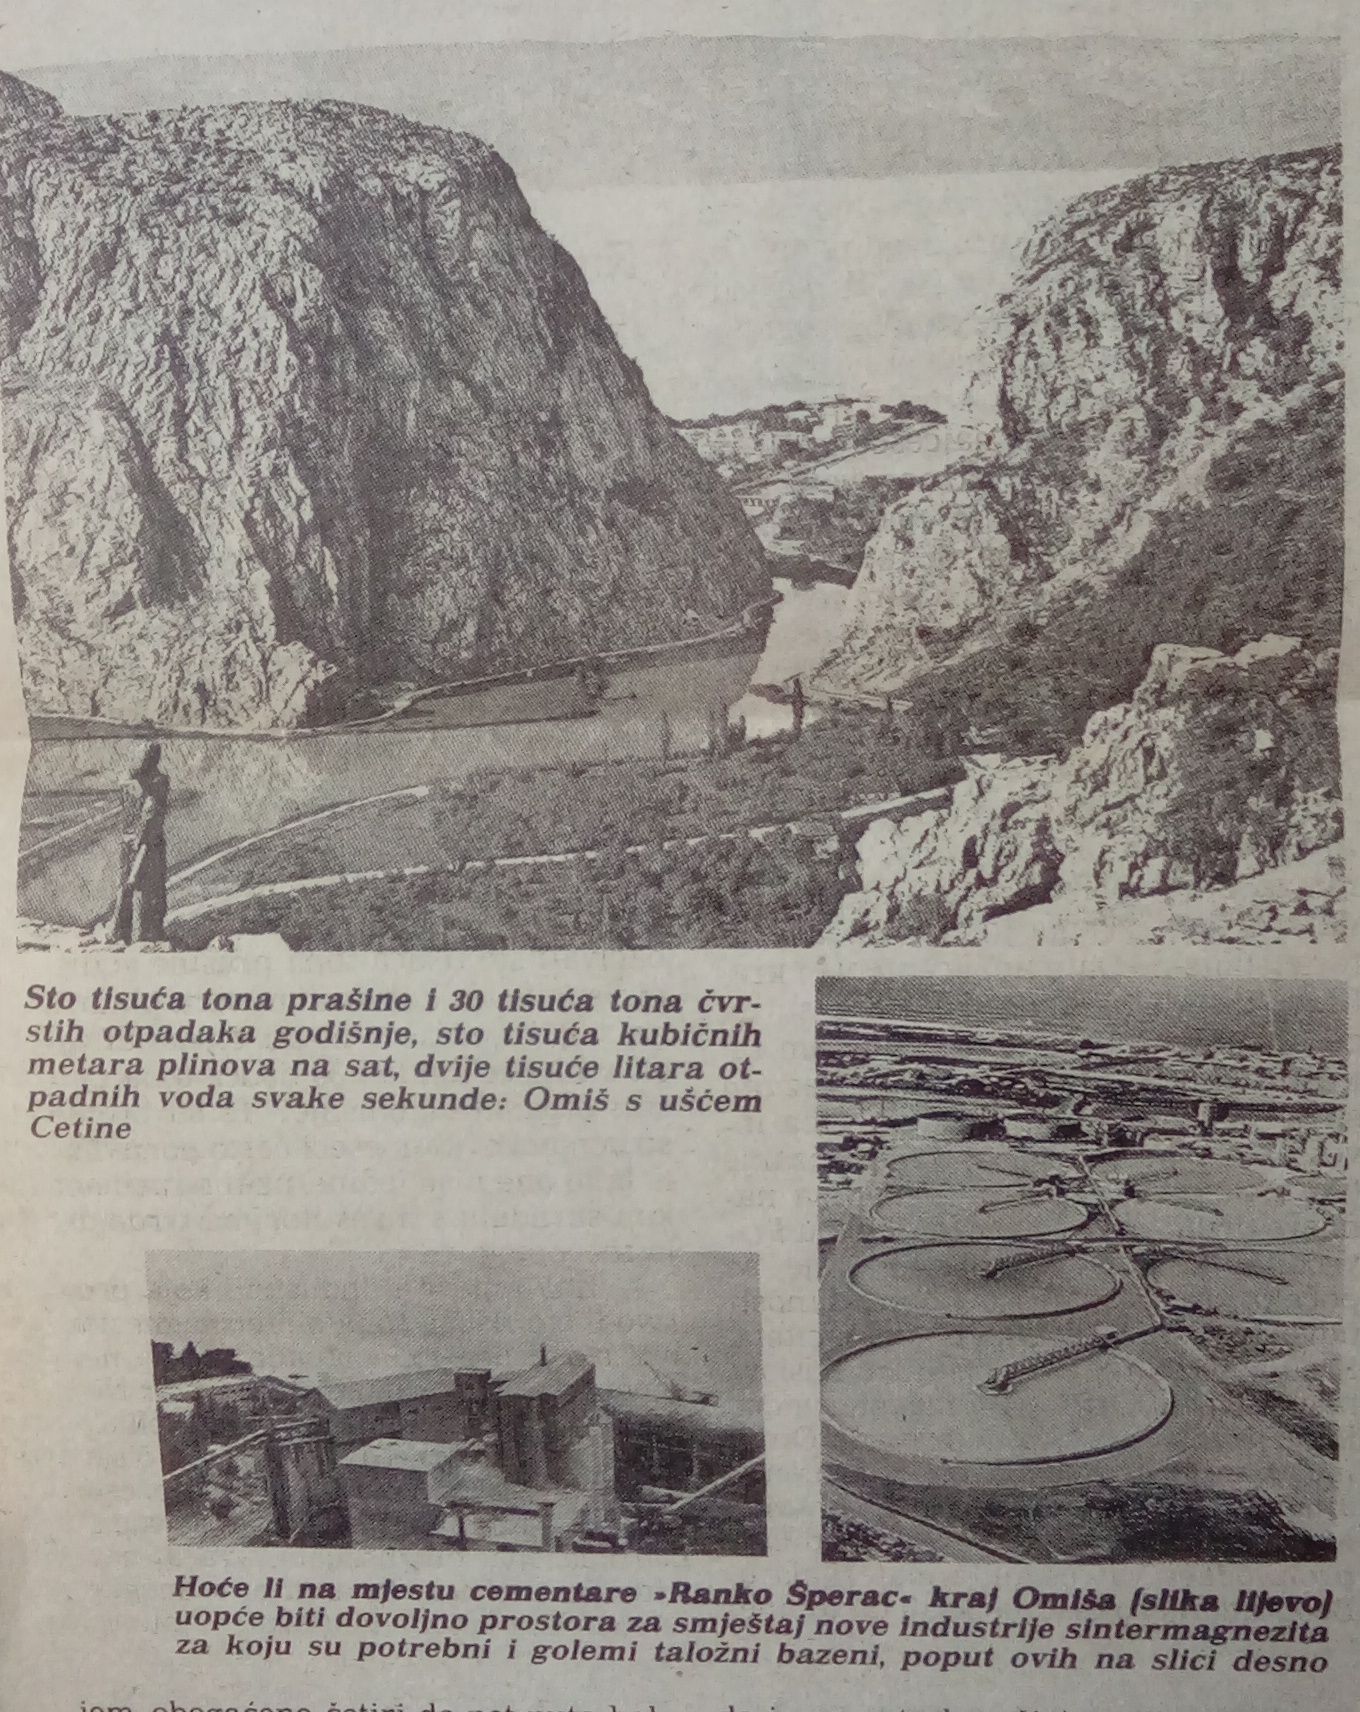 Illustration from a newspaper article on the planned construction of a sintered magnesia factory in Omiš, published in Vjesnik on 24 February 1979 (2018-05-23).